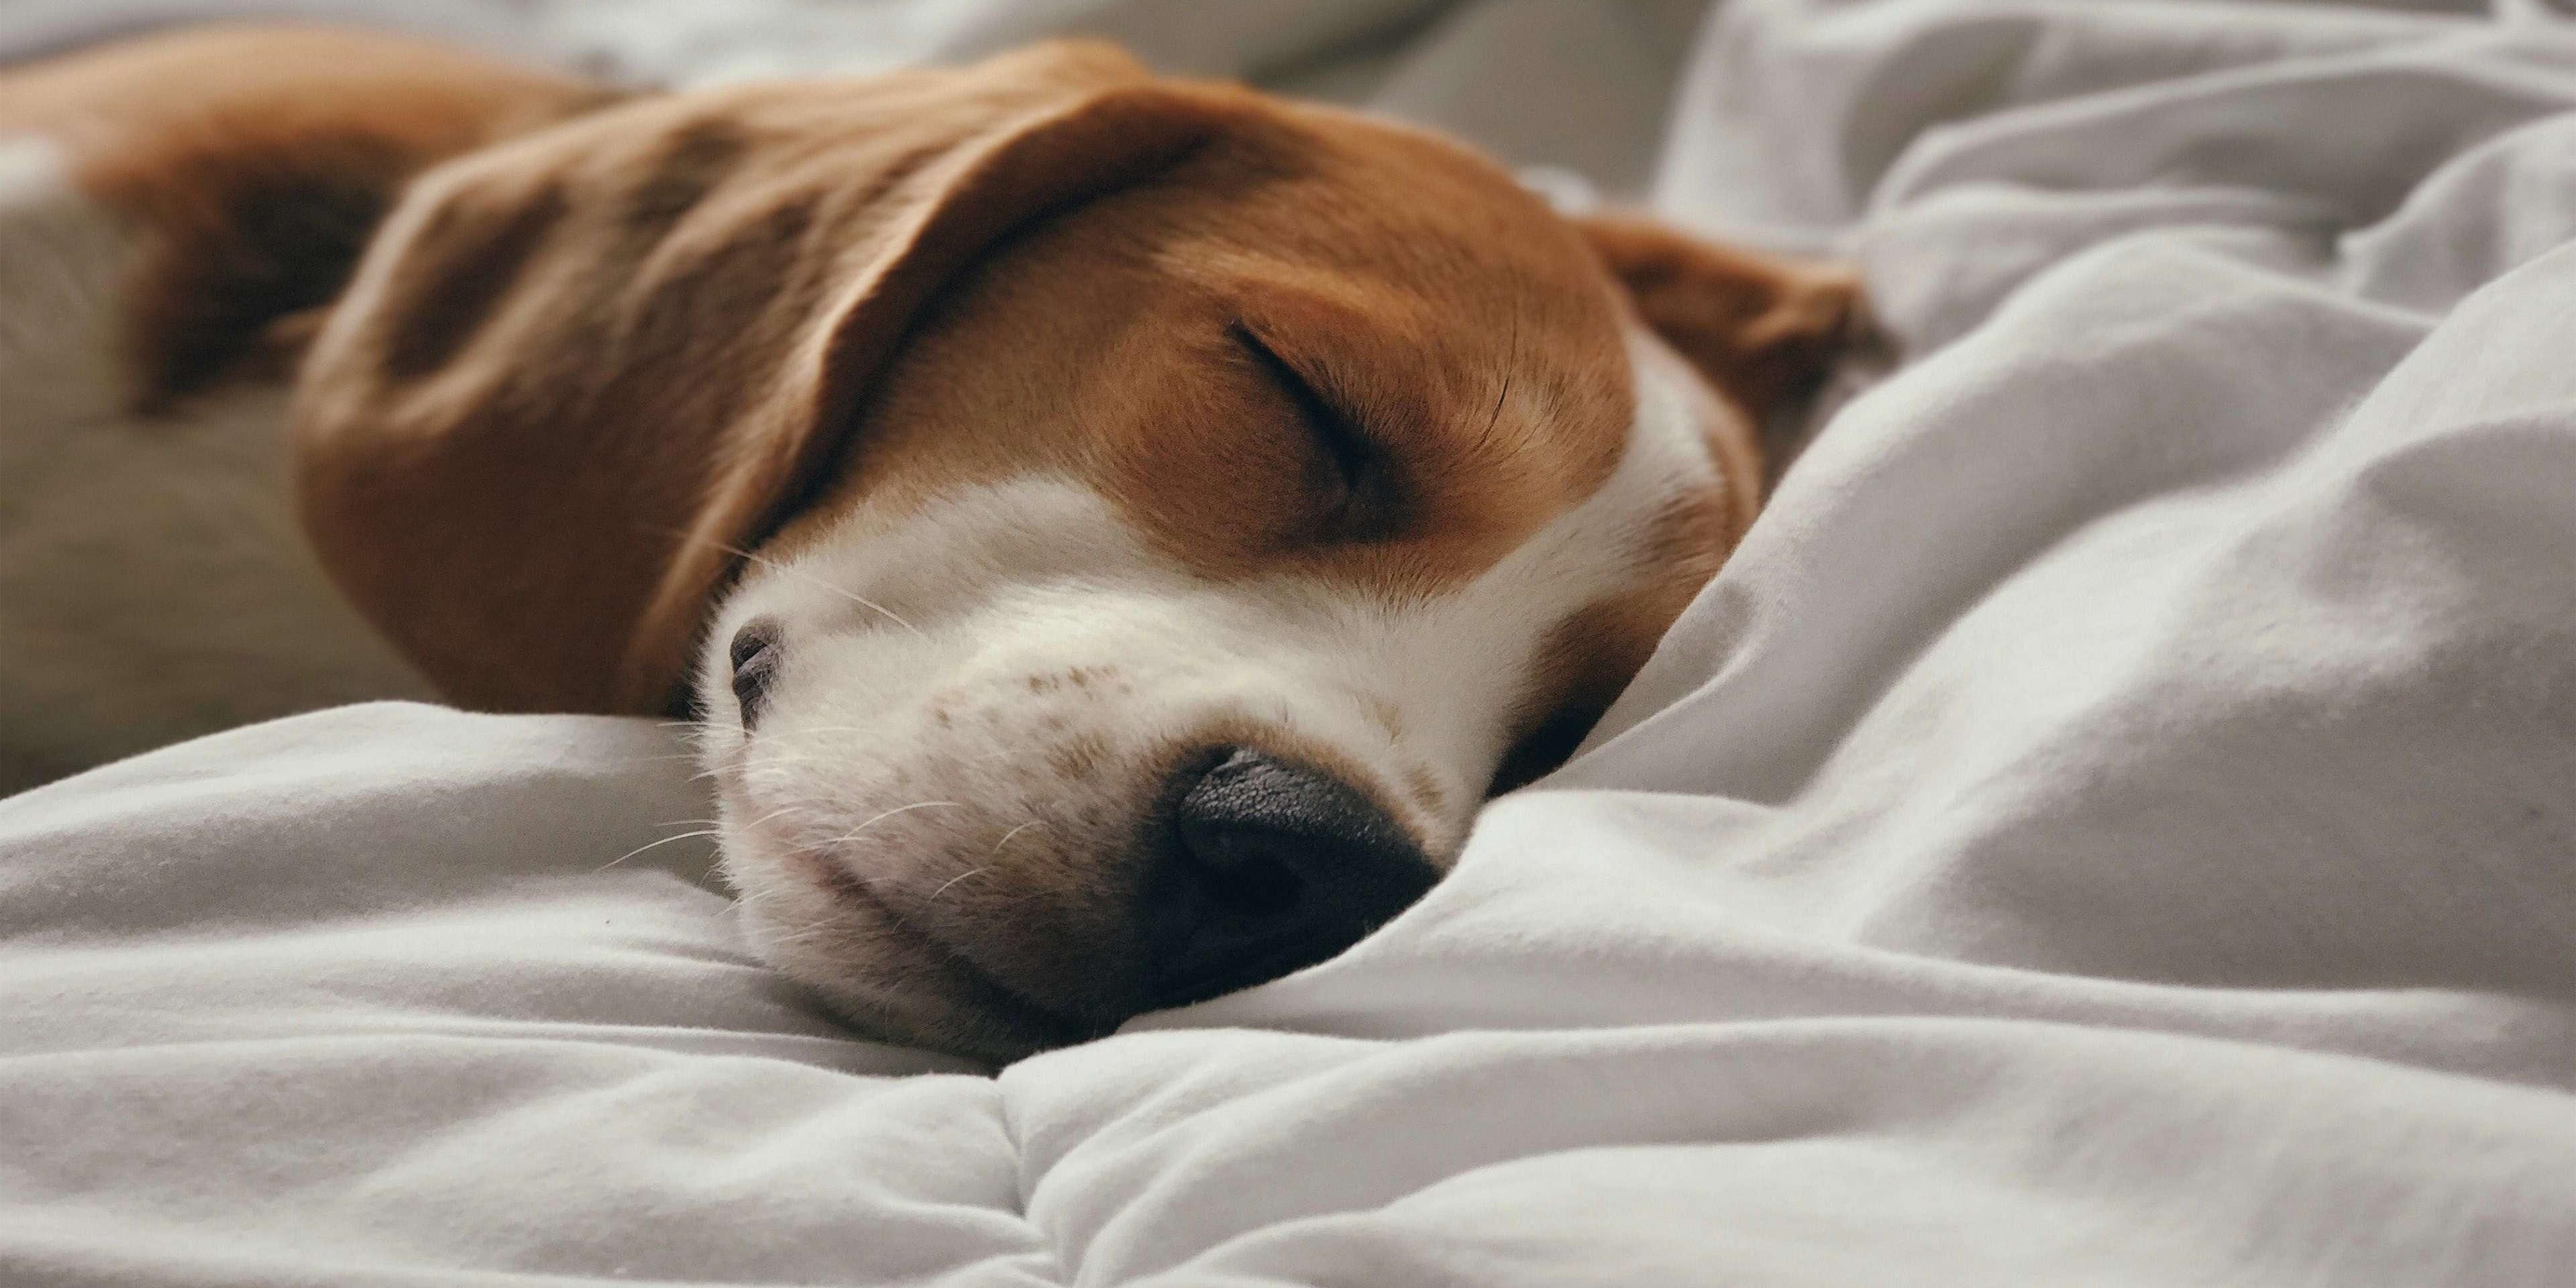 Bring your furry family member when you travel to the Holiday Inn Express Indianapolis South!